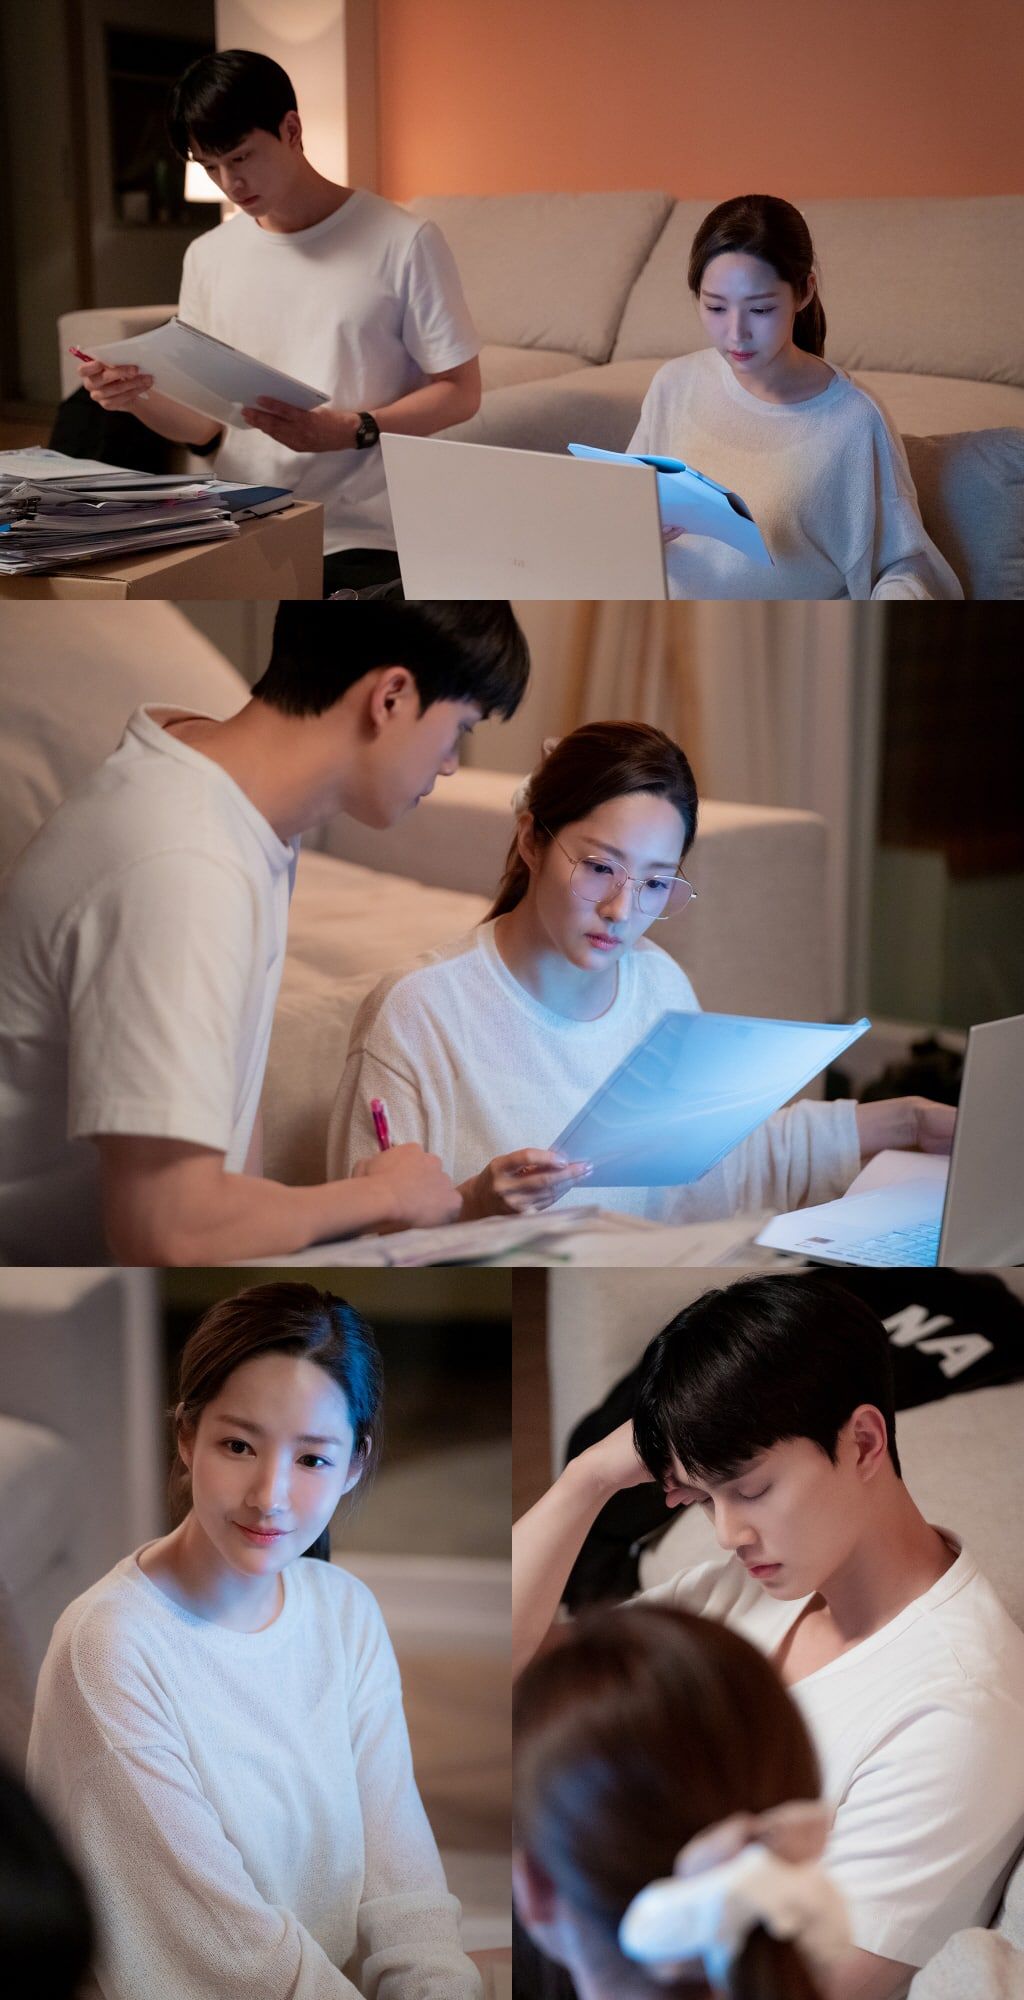 Still cut episode 4 drama Forecasting Love and Weather